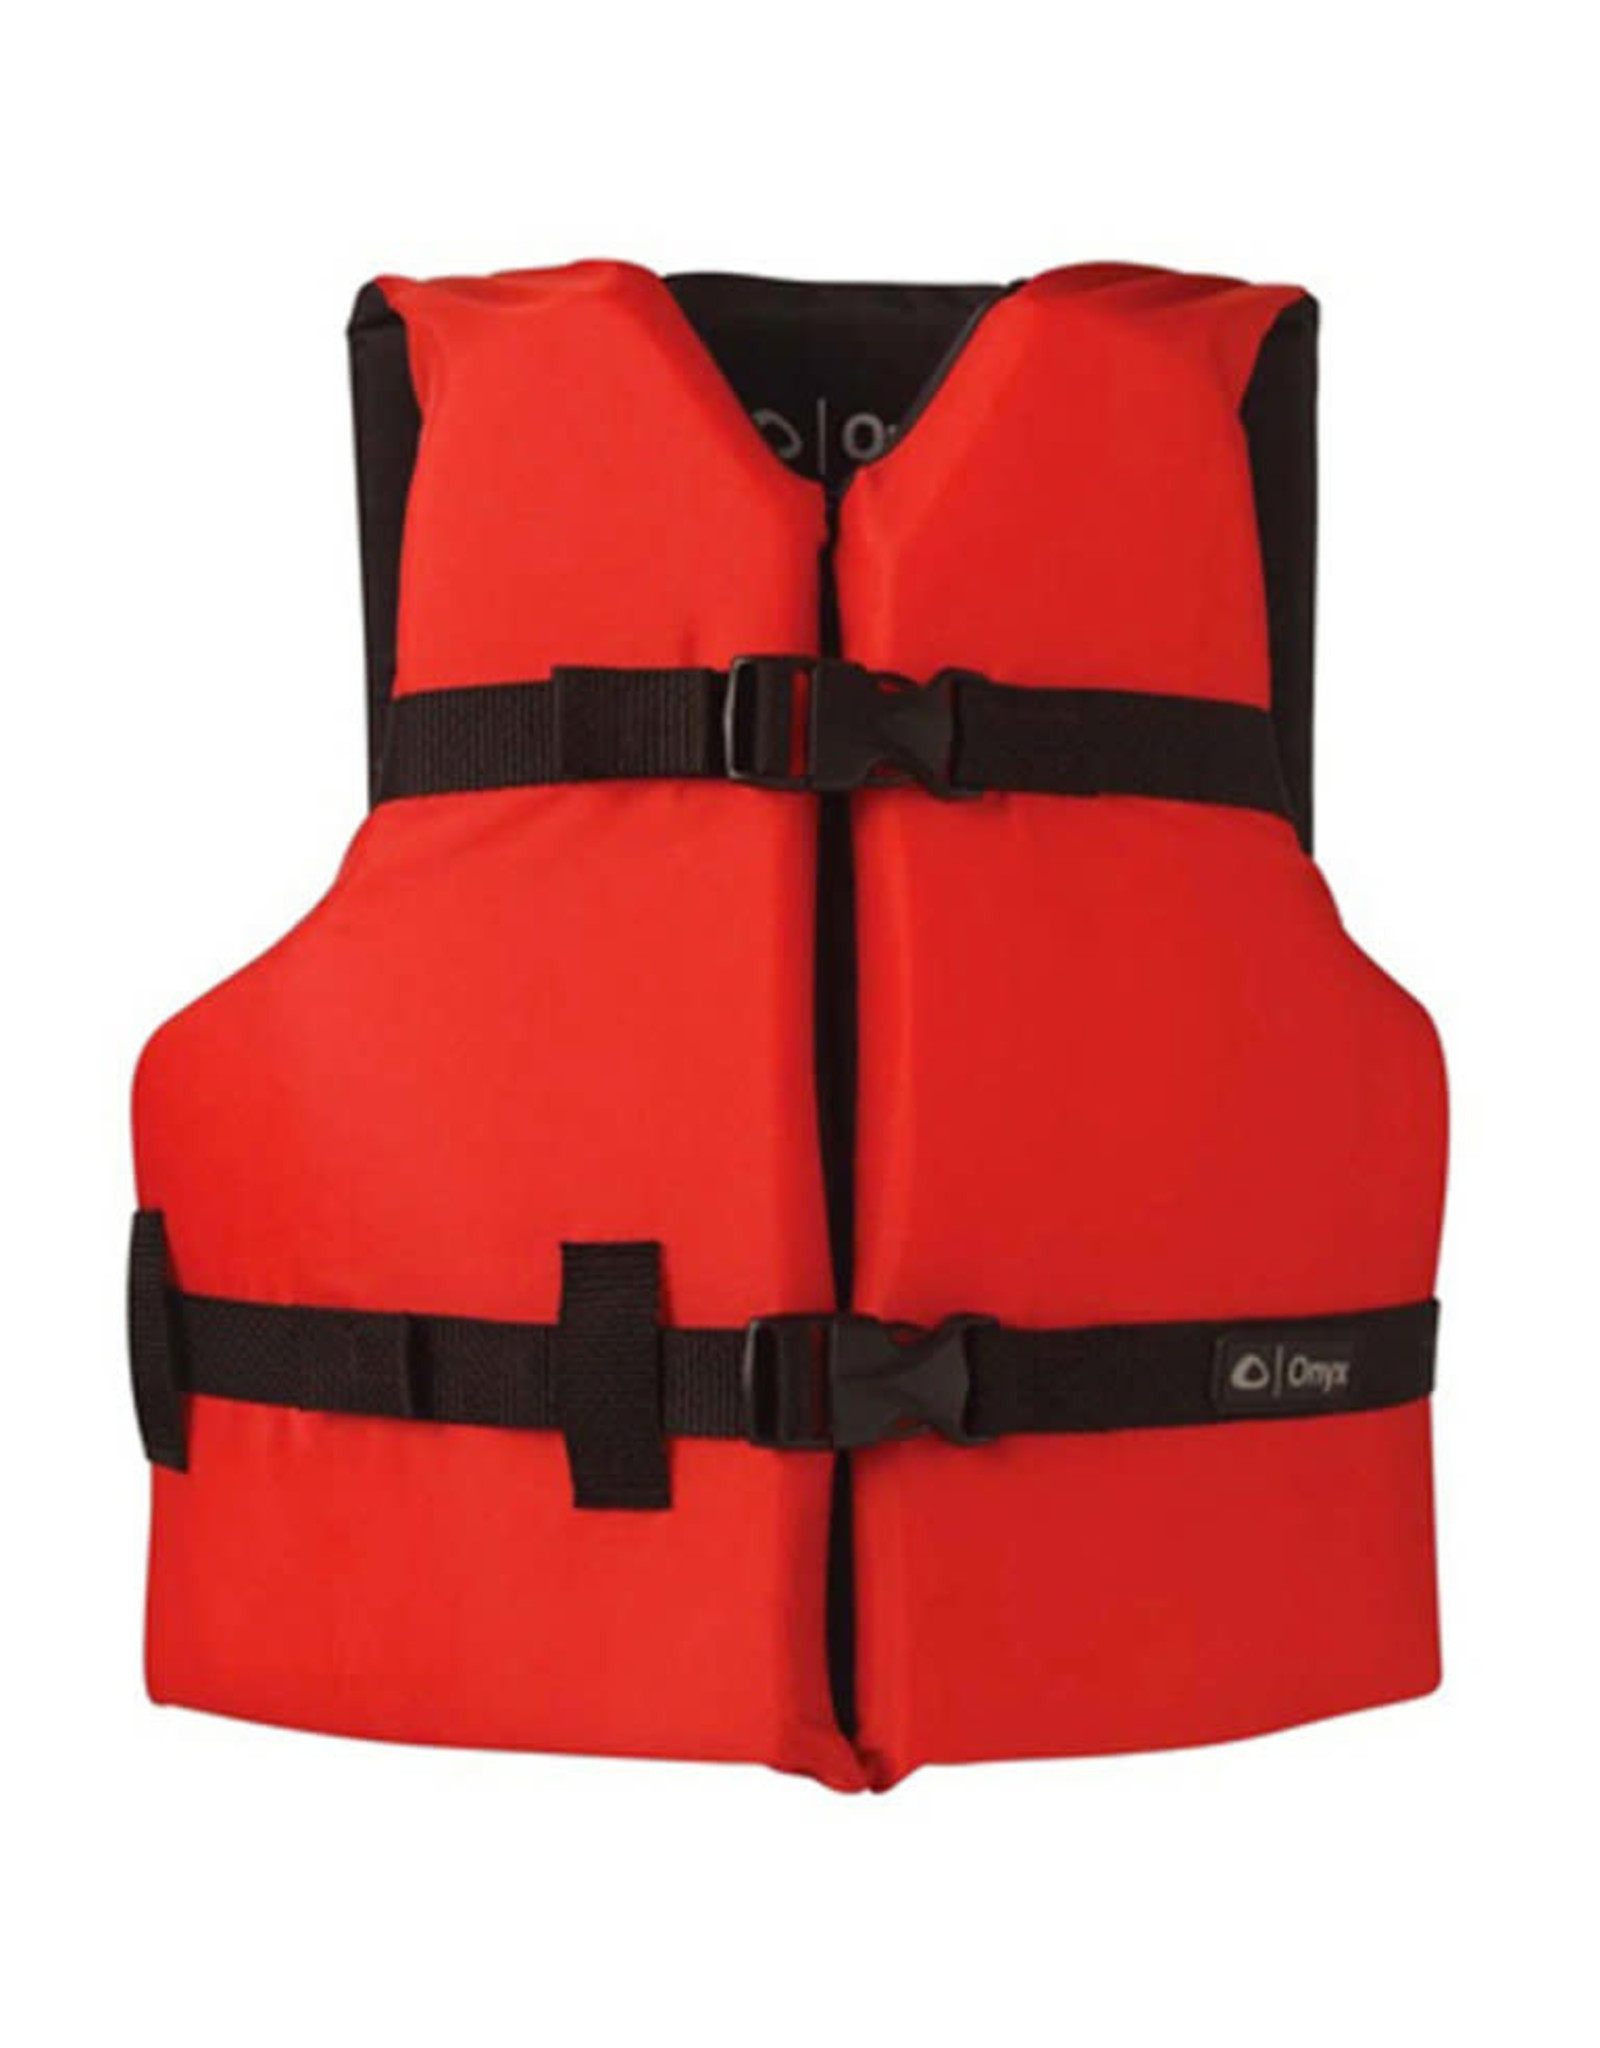 Onyx Youth Life Jacket 55-88 Lbs Red